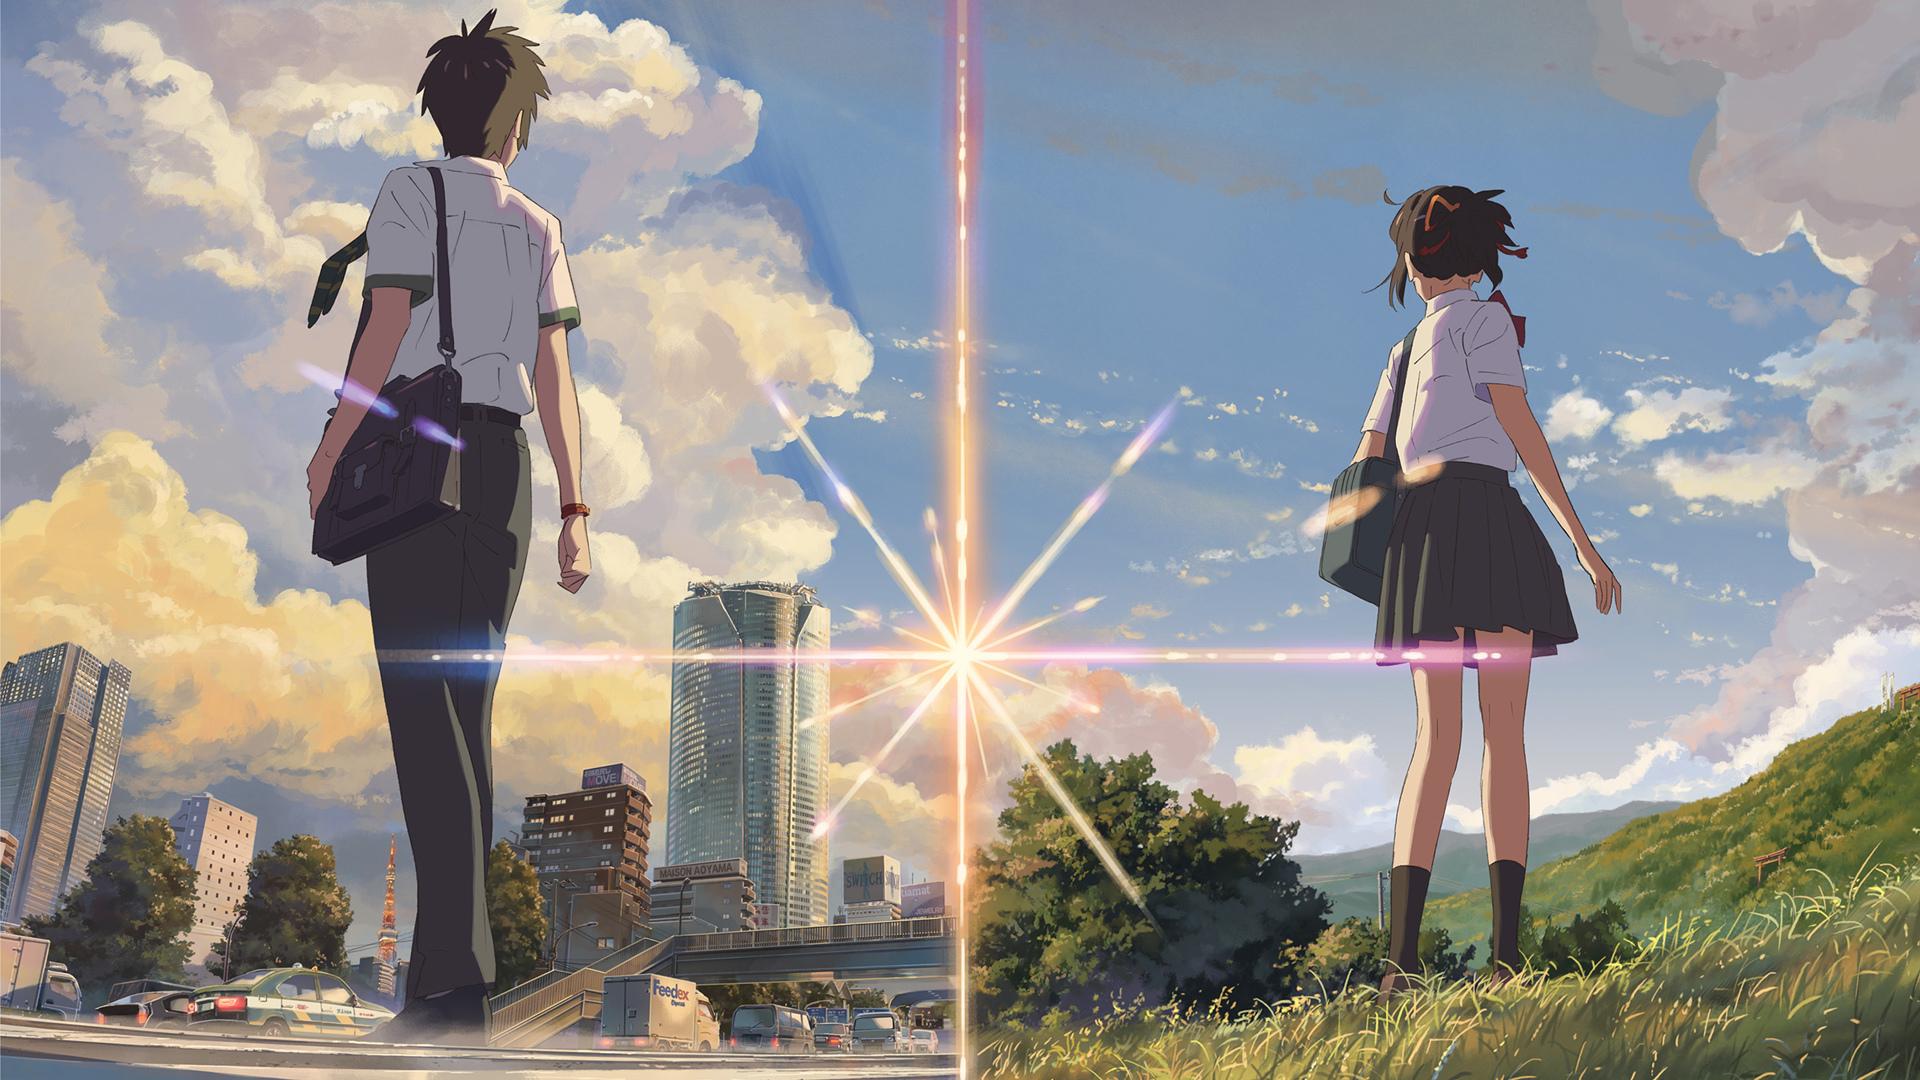 Your Name: The Japanese Anime About Body Swapping Teens